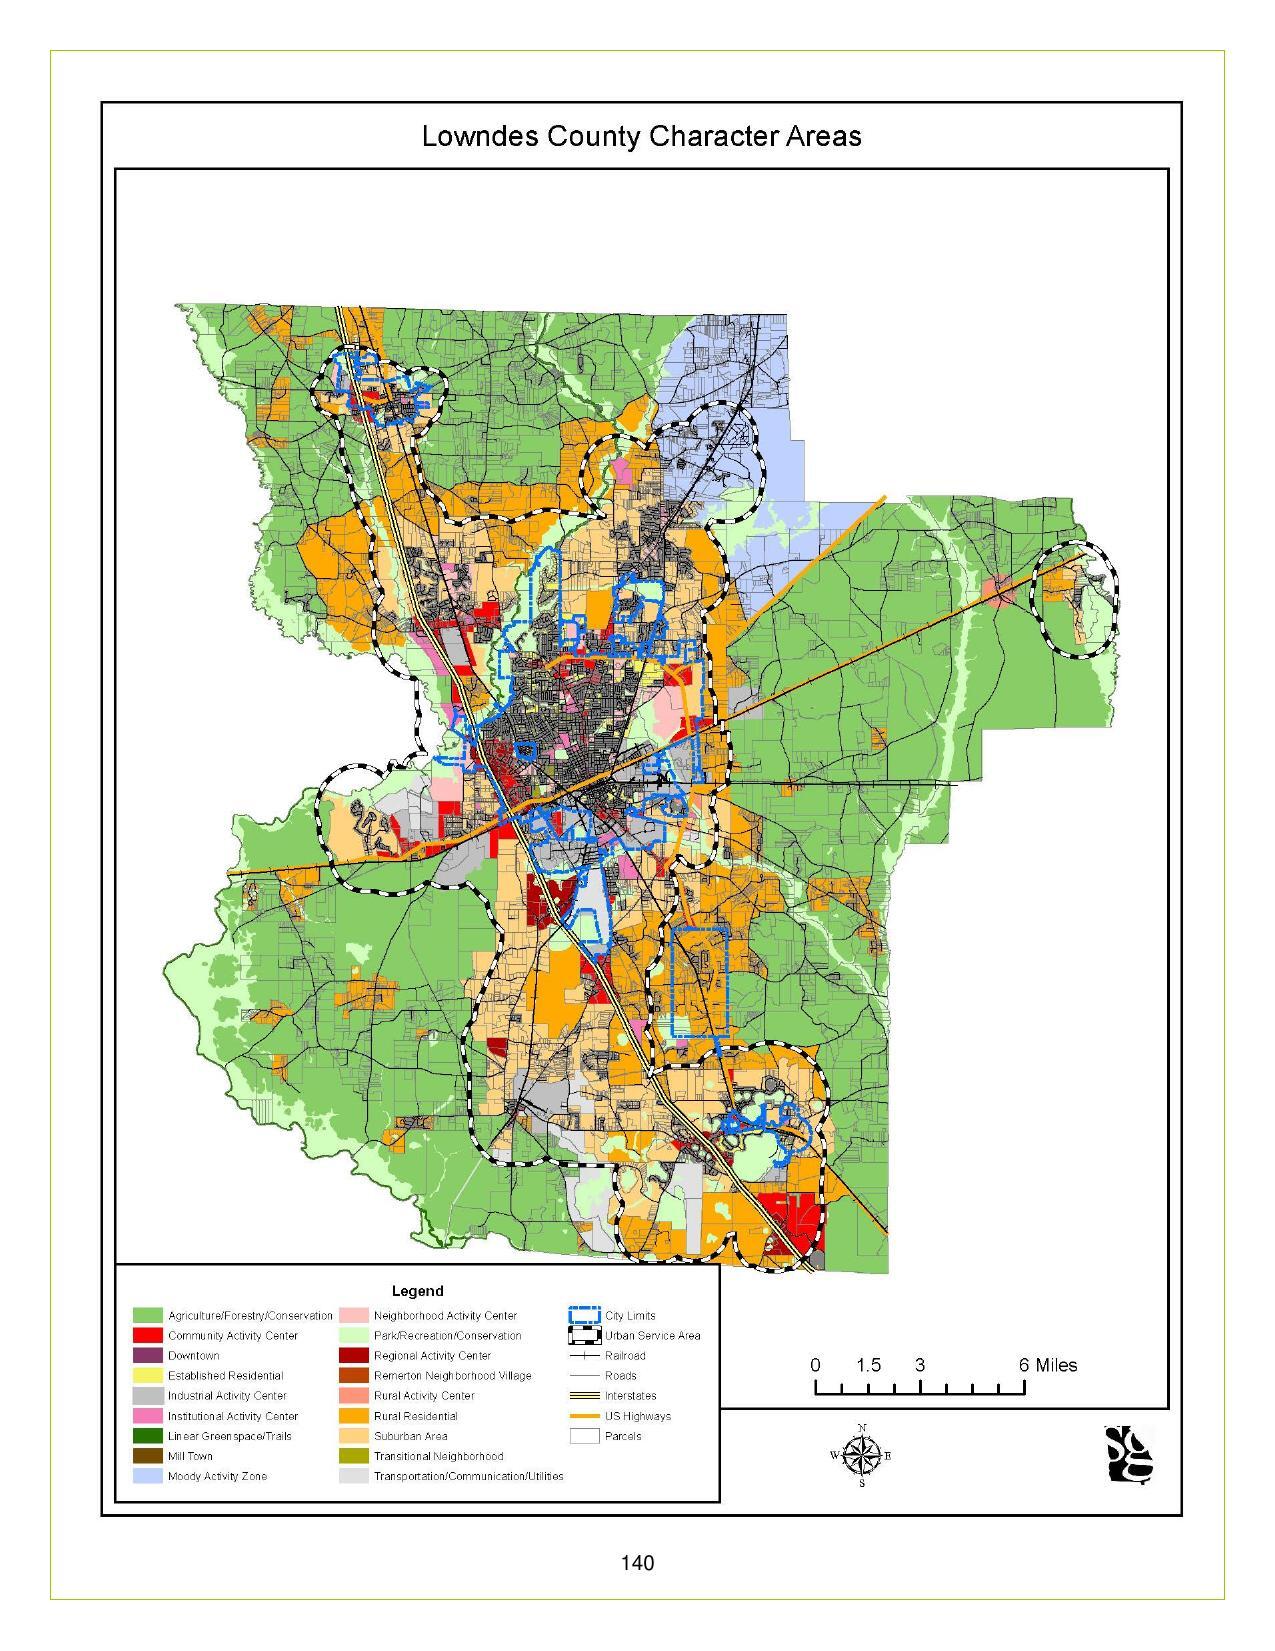 Lowndes County Character Area Map 2016